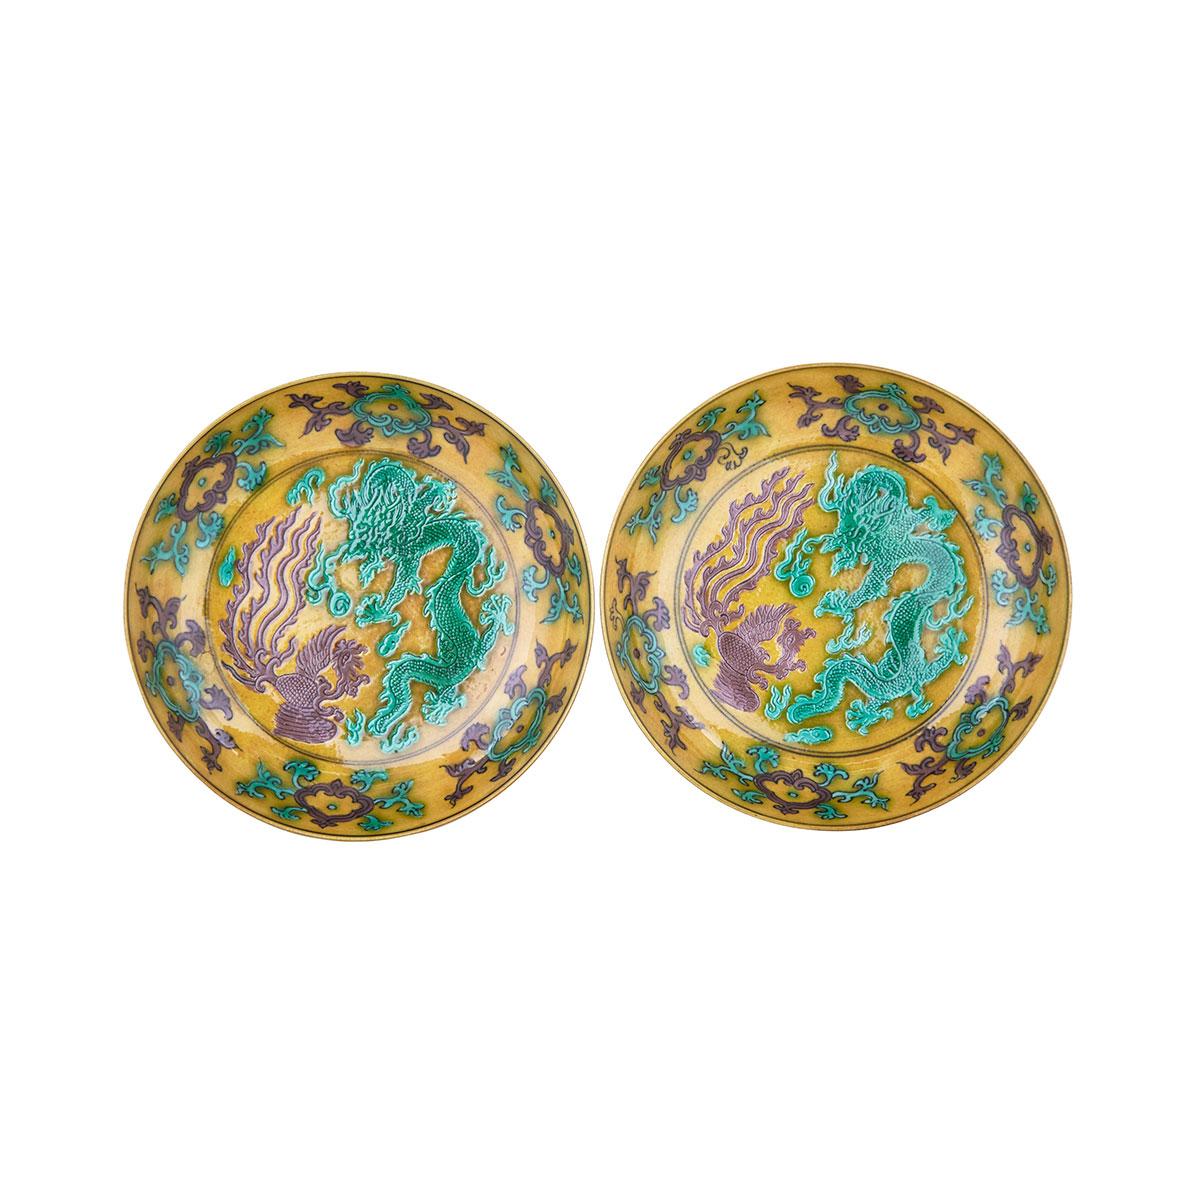 Pair of Yellow Ground ‘Dragon and Phoenix’ Dishes, Qianlong Mark